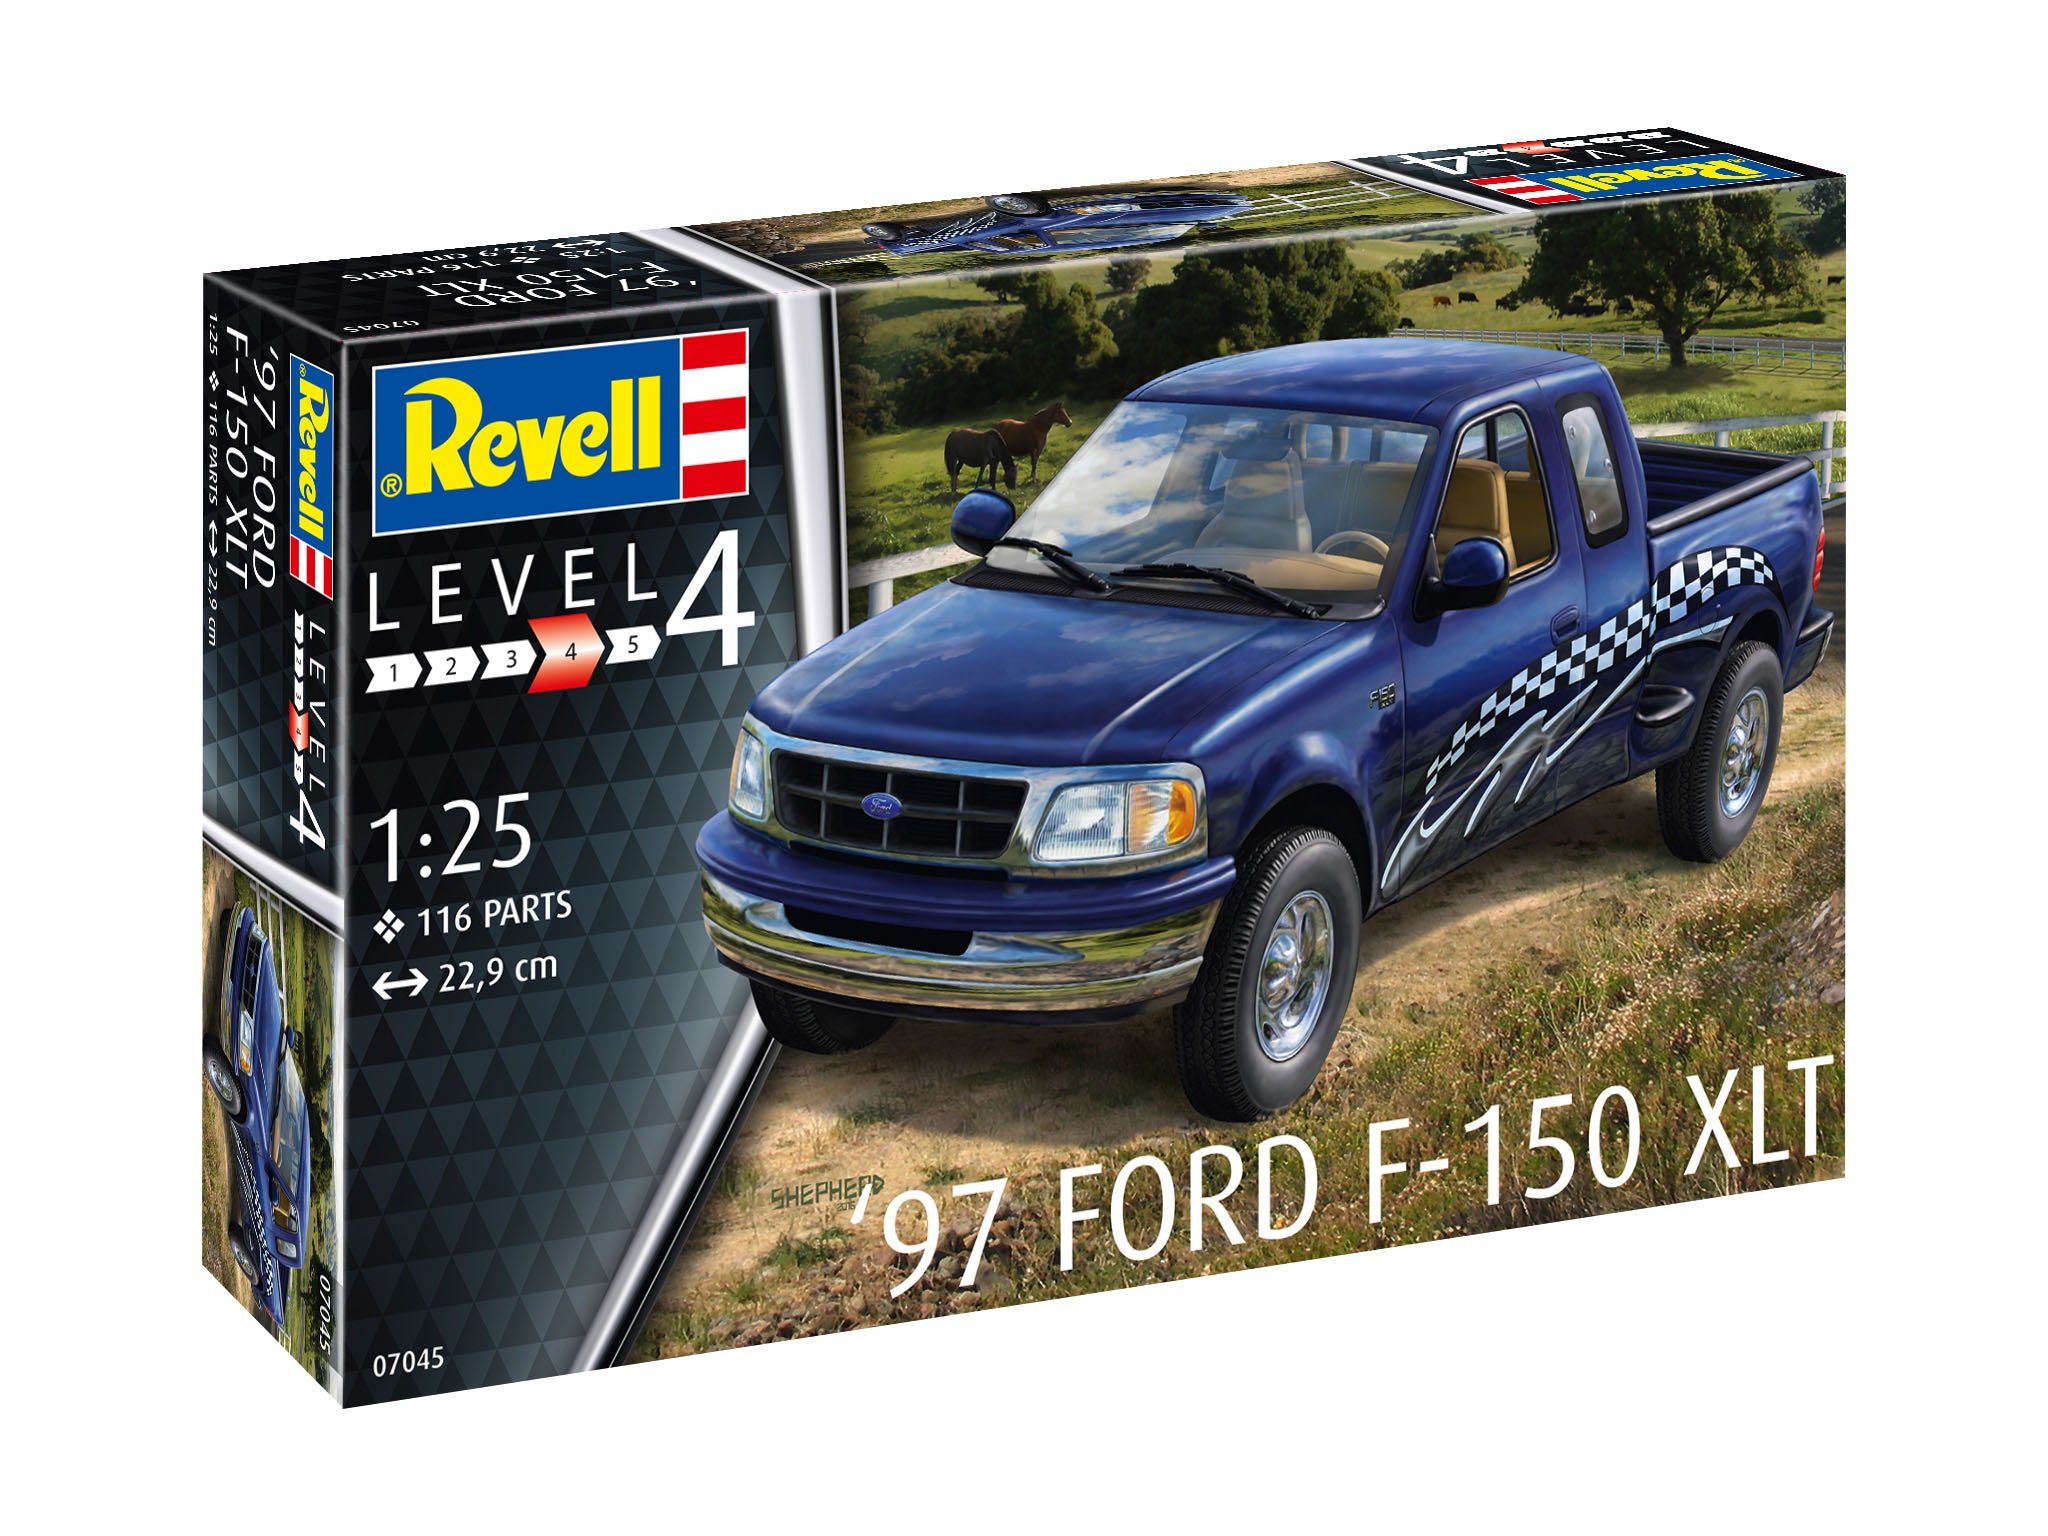 Ford F-150 XLT 1997 1:25 Scale Kit